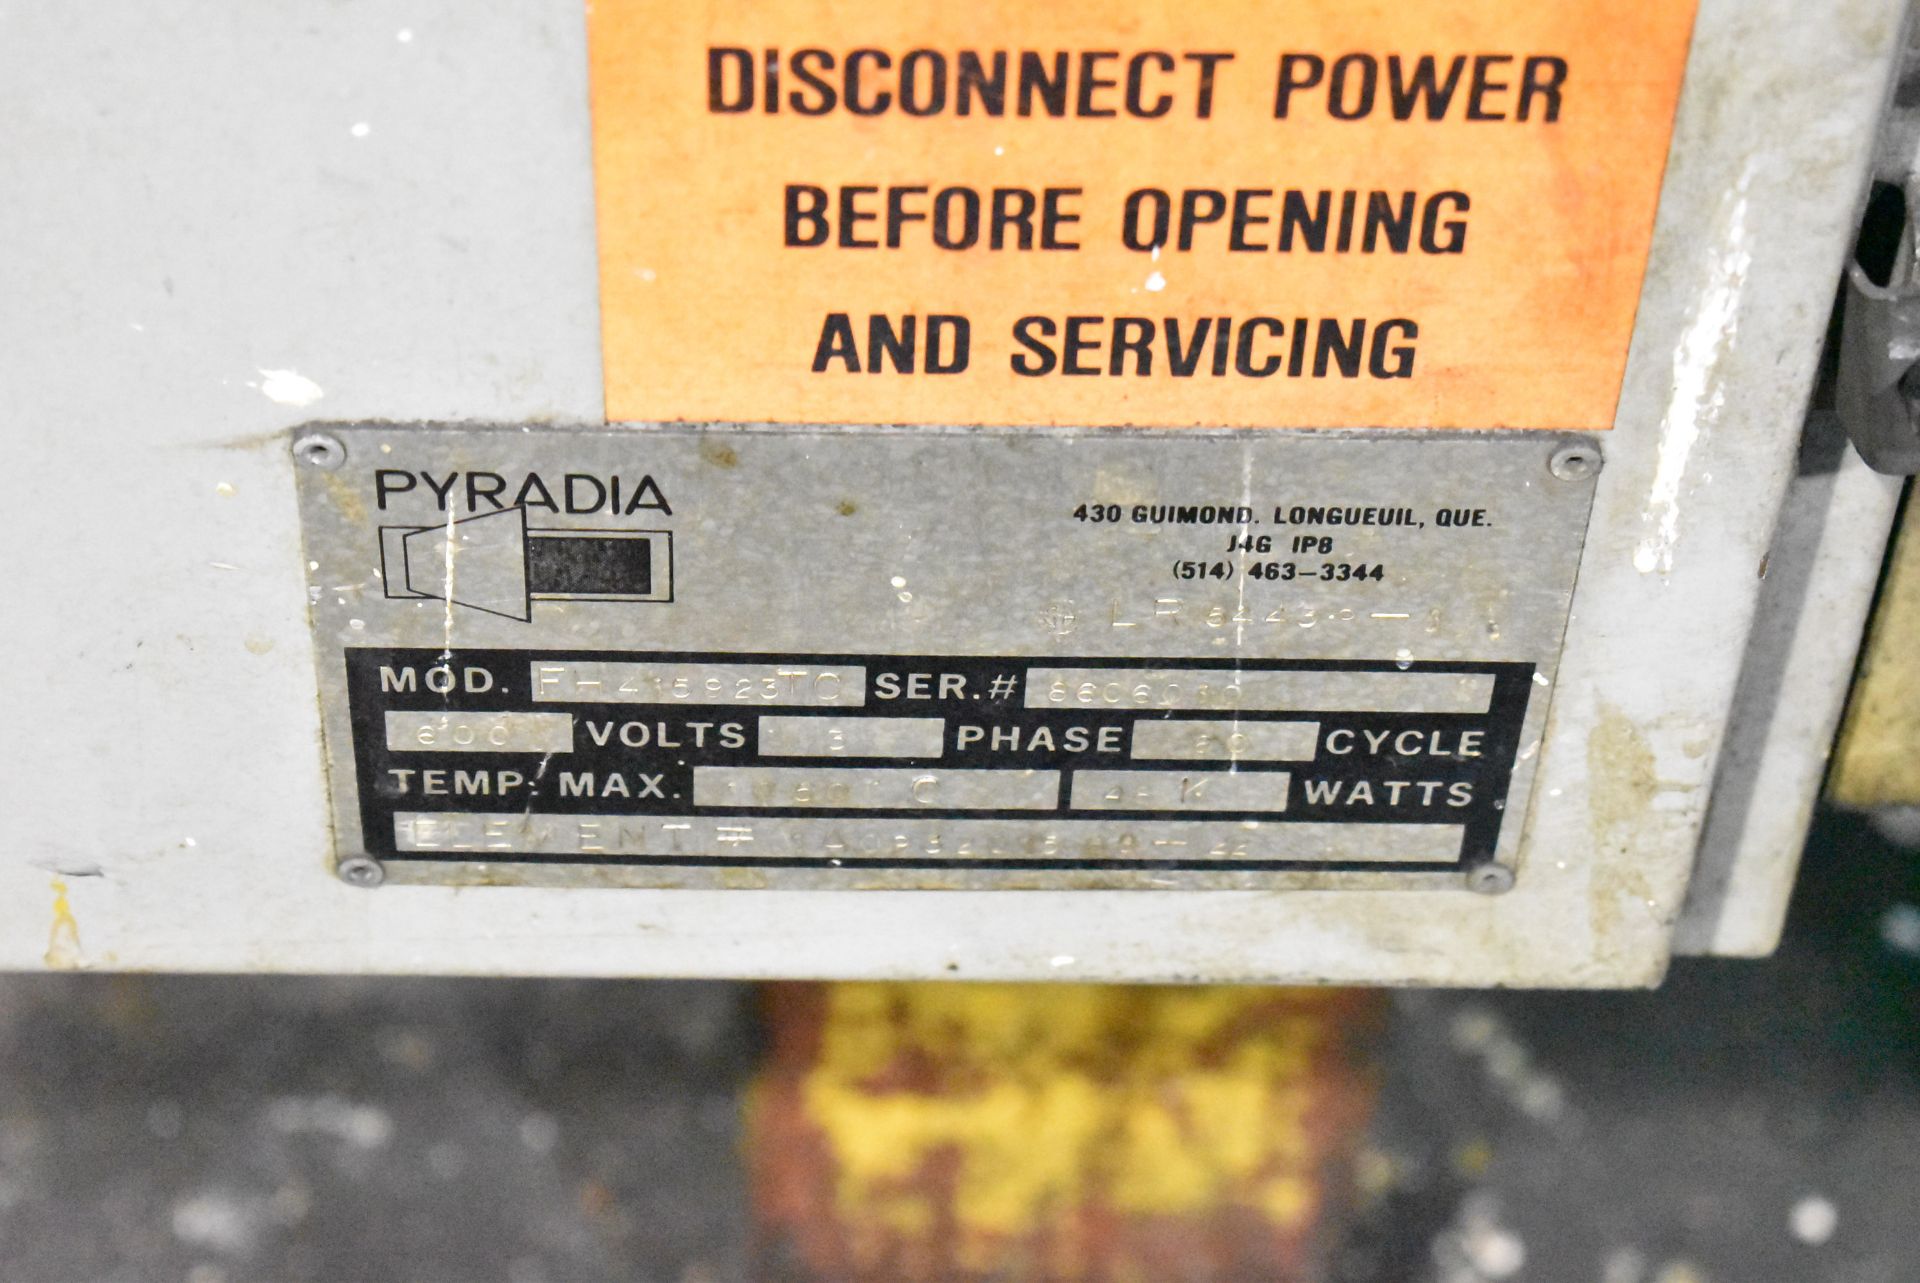 PYRADIA FH 415923 TC ELECTRIC TEMPER FURNACE WITH SYSCON REX C-900 DIGITAL TEMPERATURE CONTROLLER, - Image 11 of 14